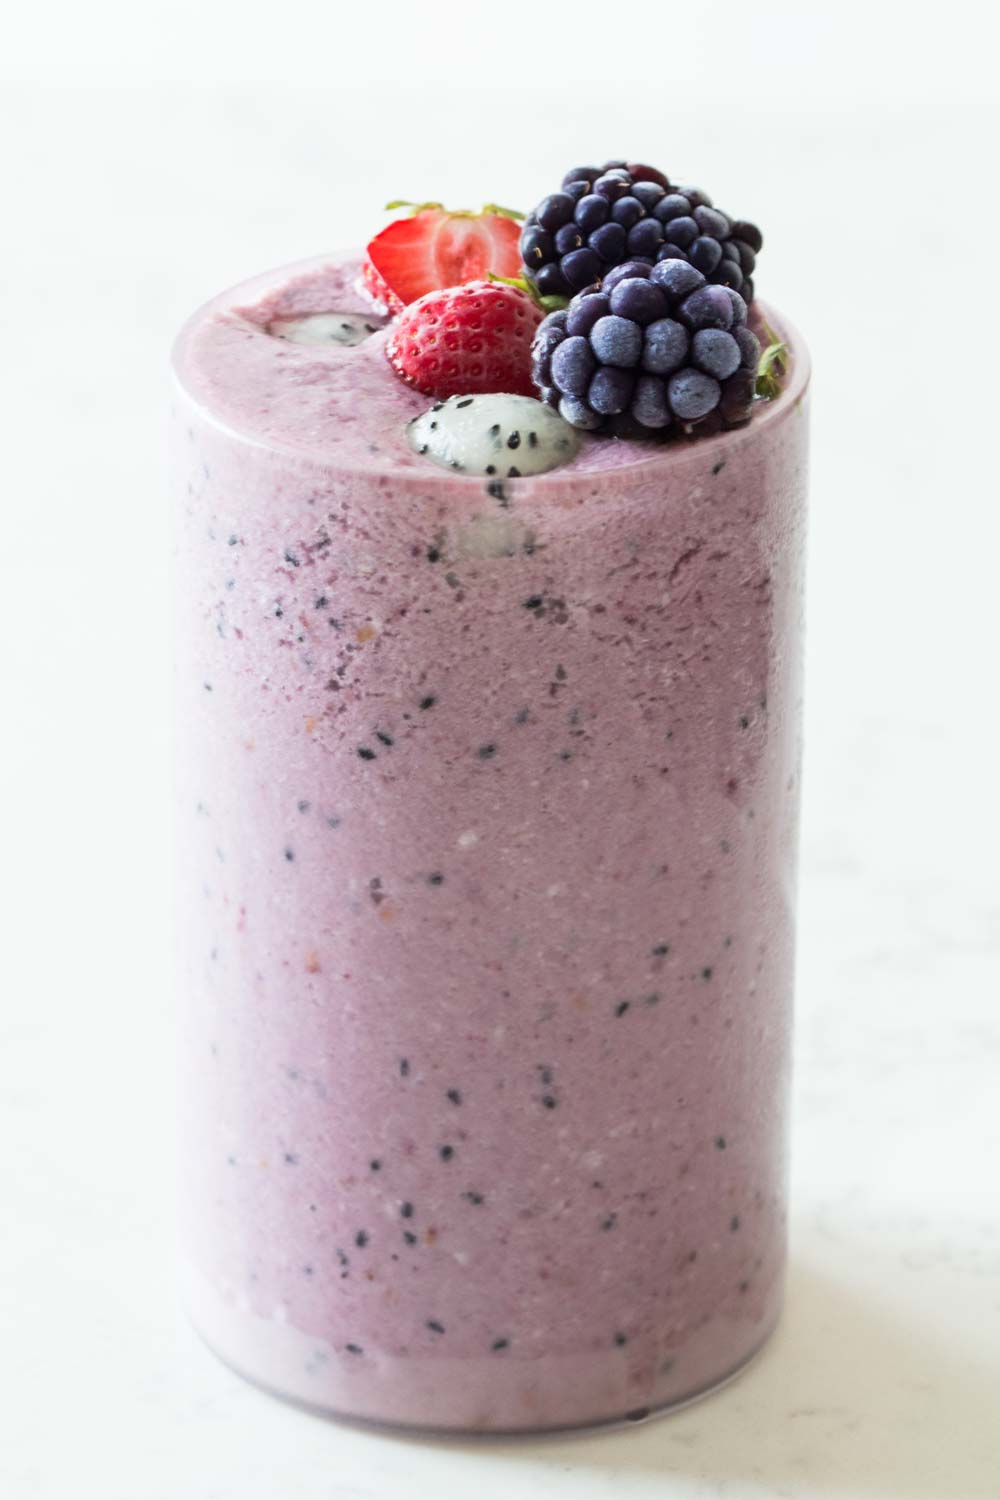 Tall glass filled to the rim with dragon fruit smoothie topped with strawberries, blackberries and balls of dragon fruit